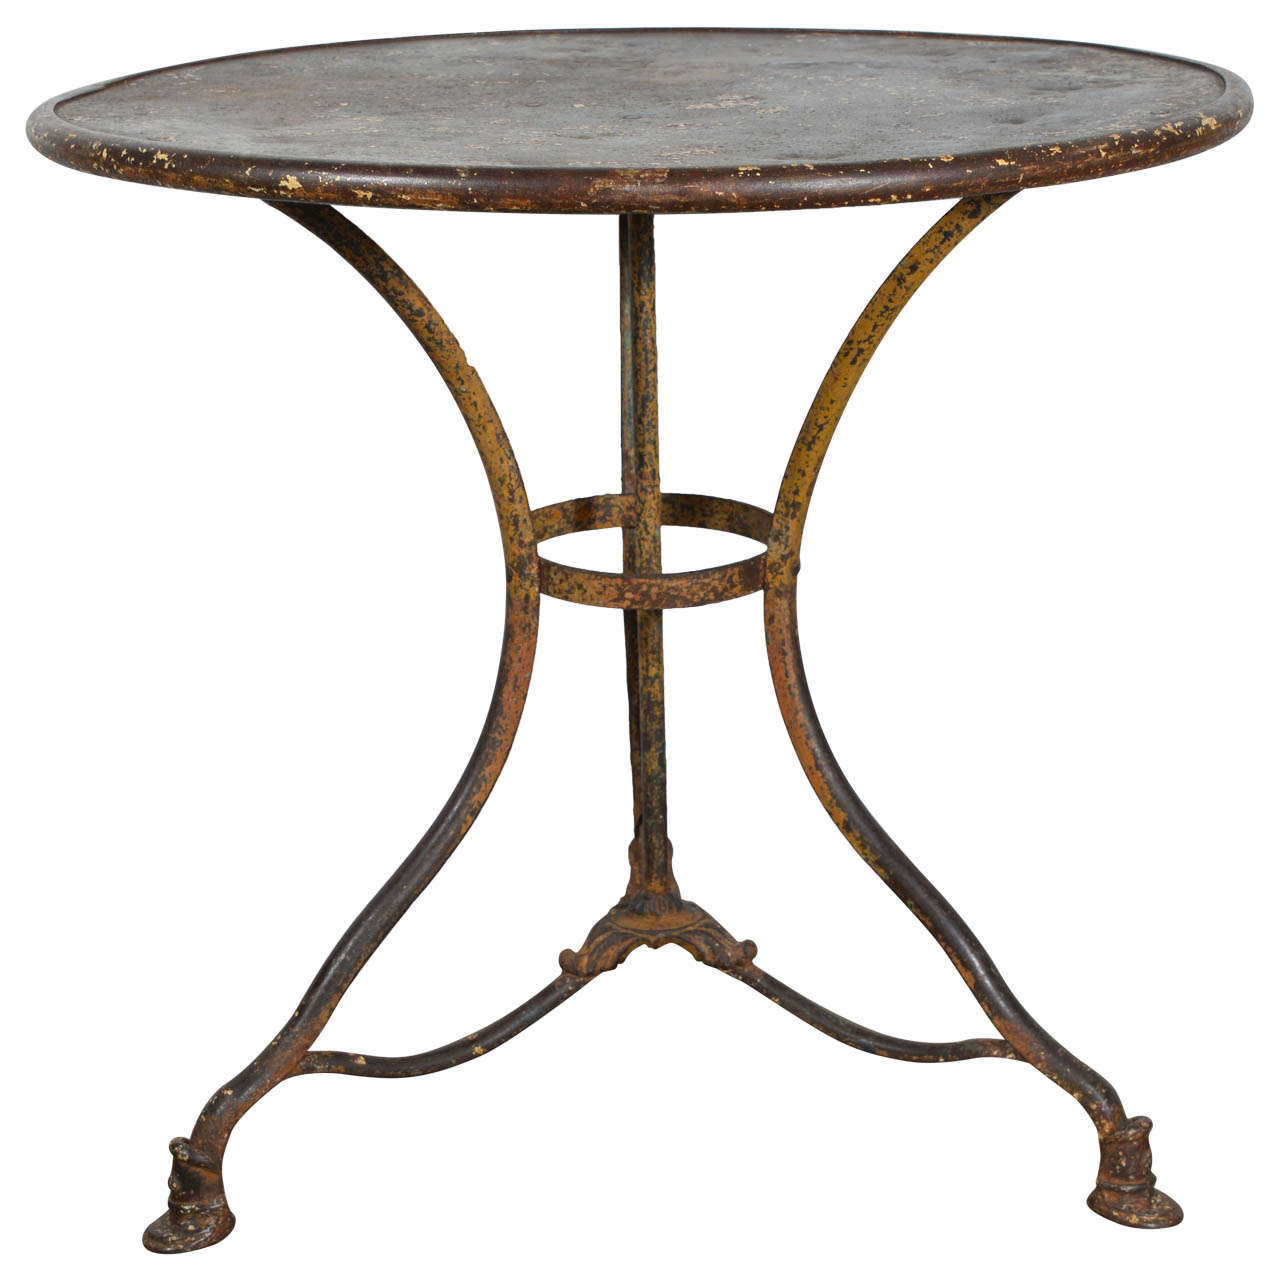 19th Century Metal Table from Arras